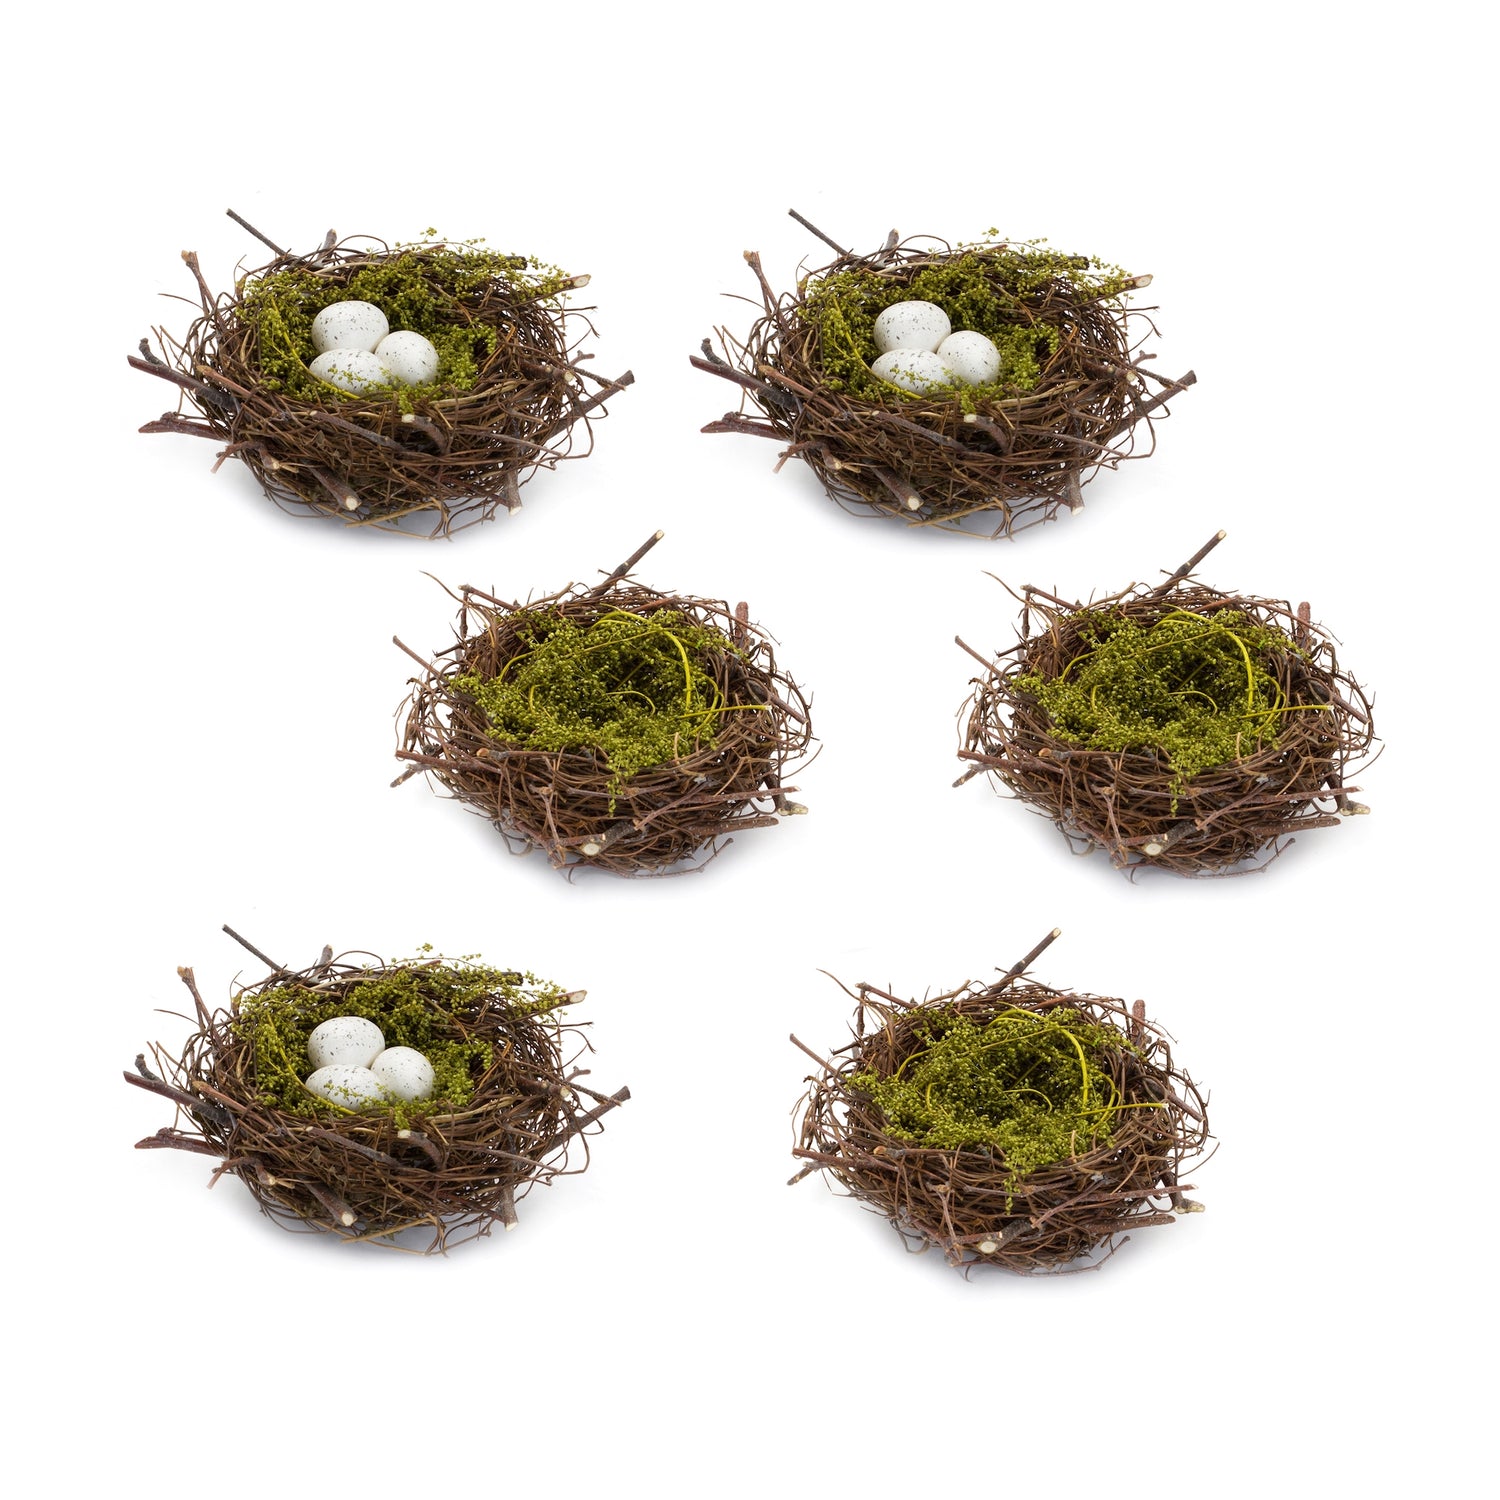 Nest and Nest with Eggs (Set of 6) 6.5"D x 3"H Natural/Foam